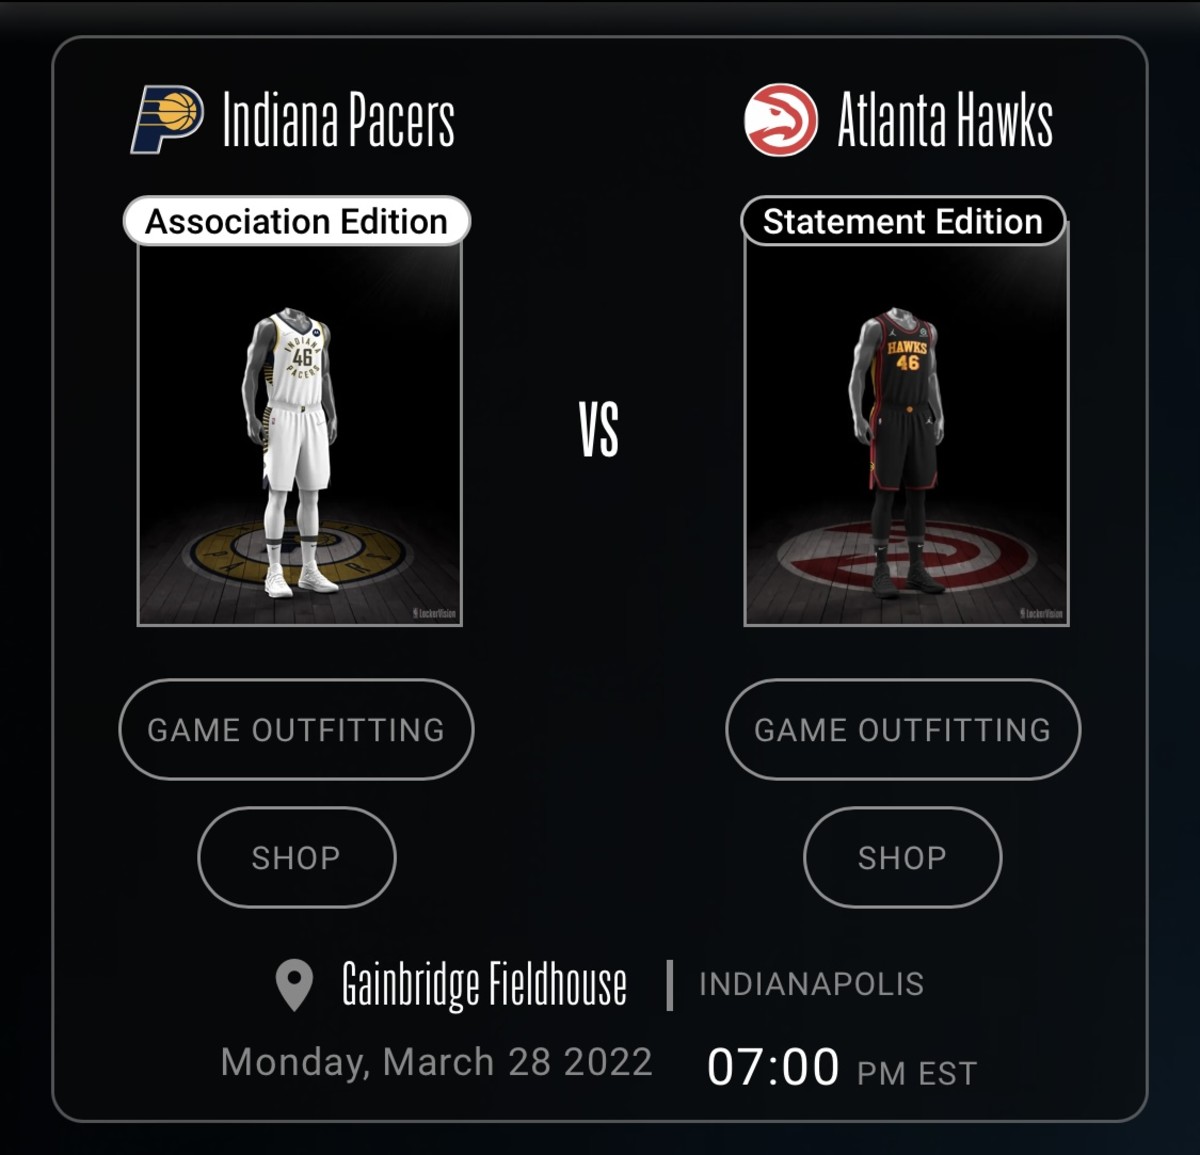 Uniforms worn by the Indiana Pacers and Atlanta Hawks on March 28, 2022.